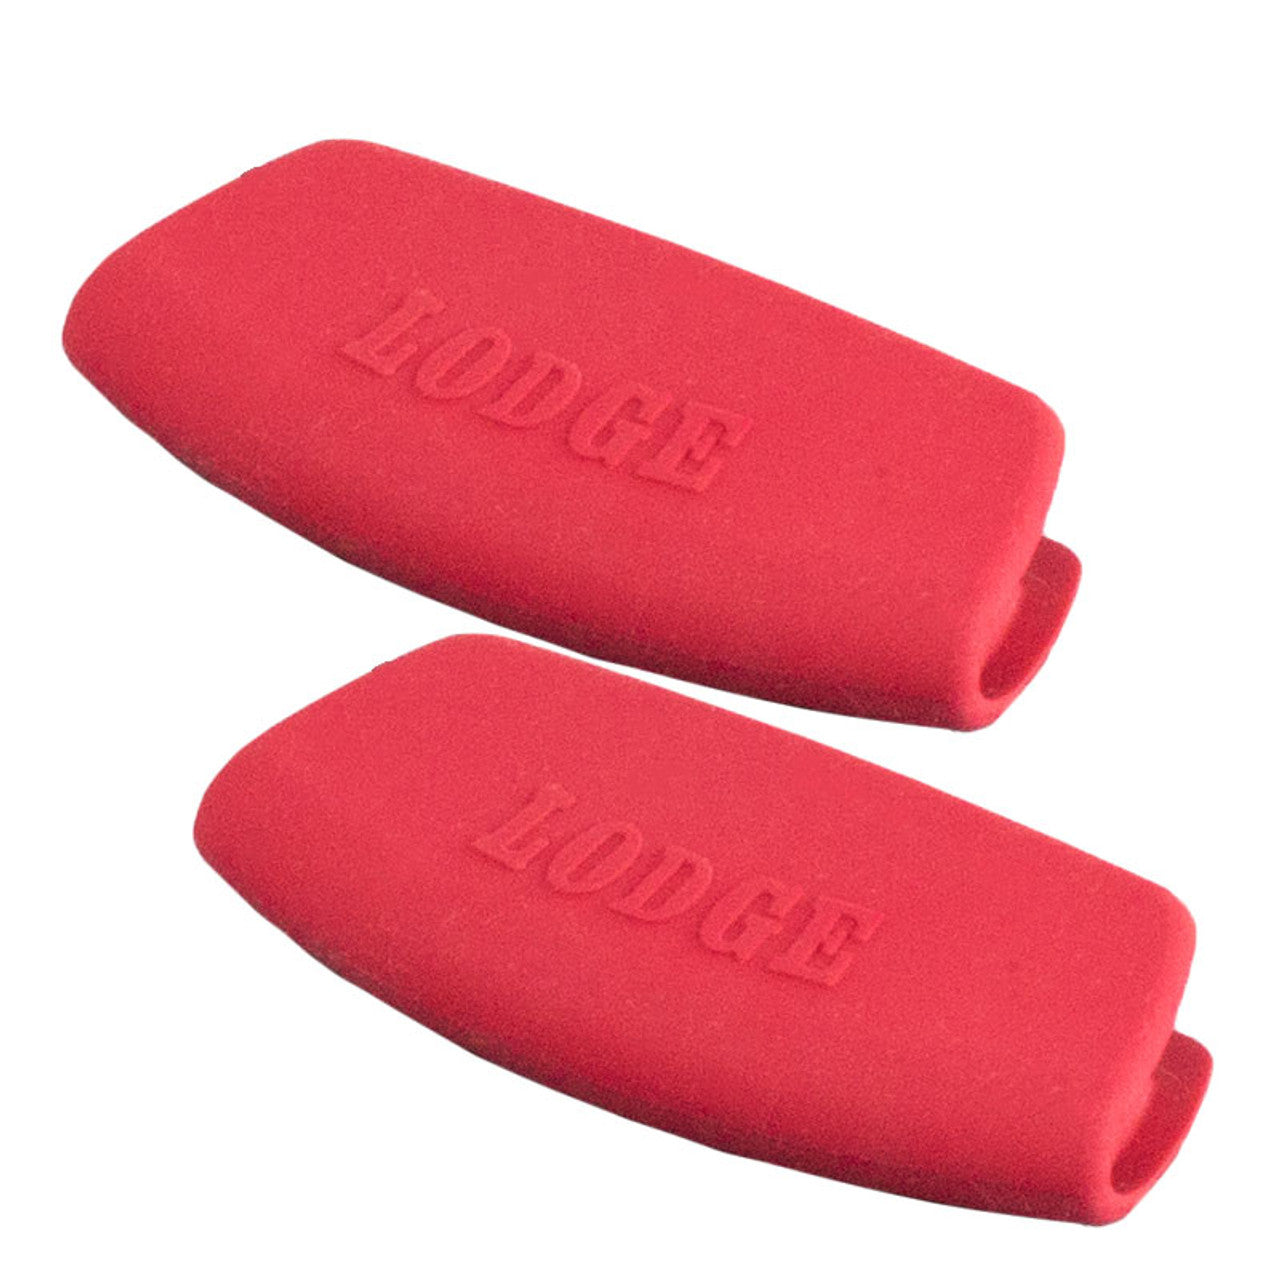 Lodge Bakeware Silicone Grips (Set Of 2)